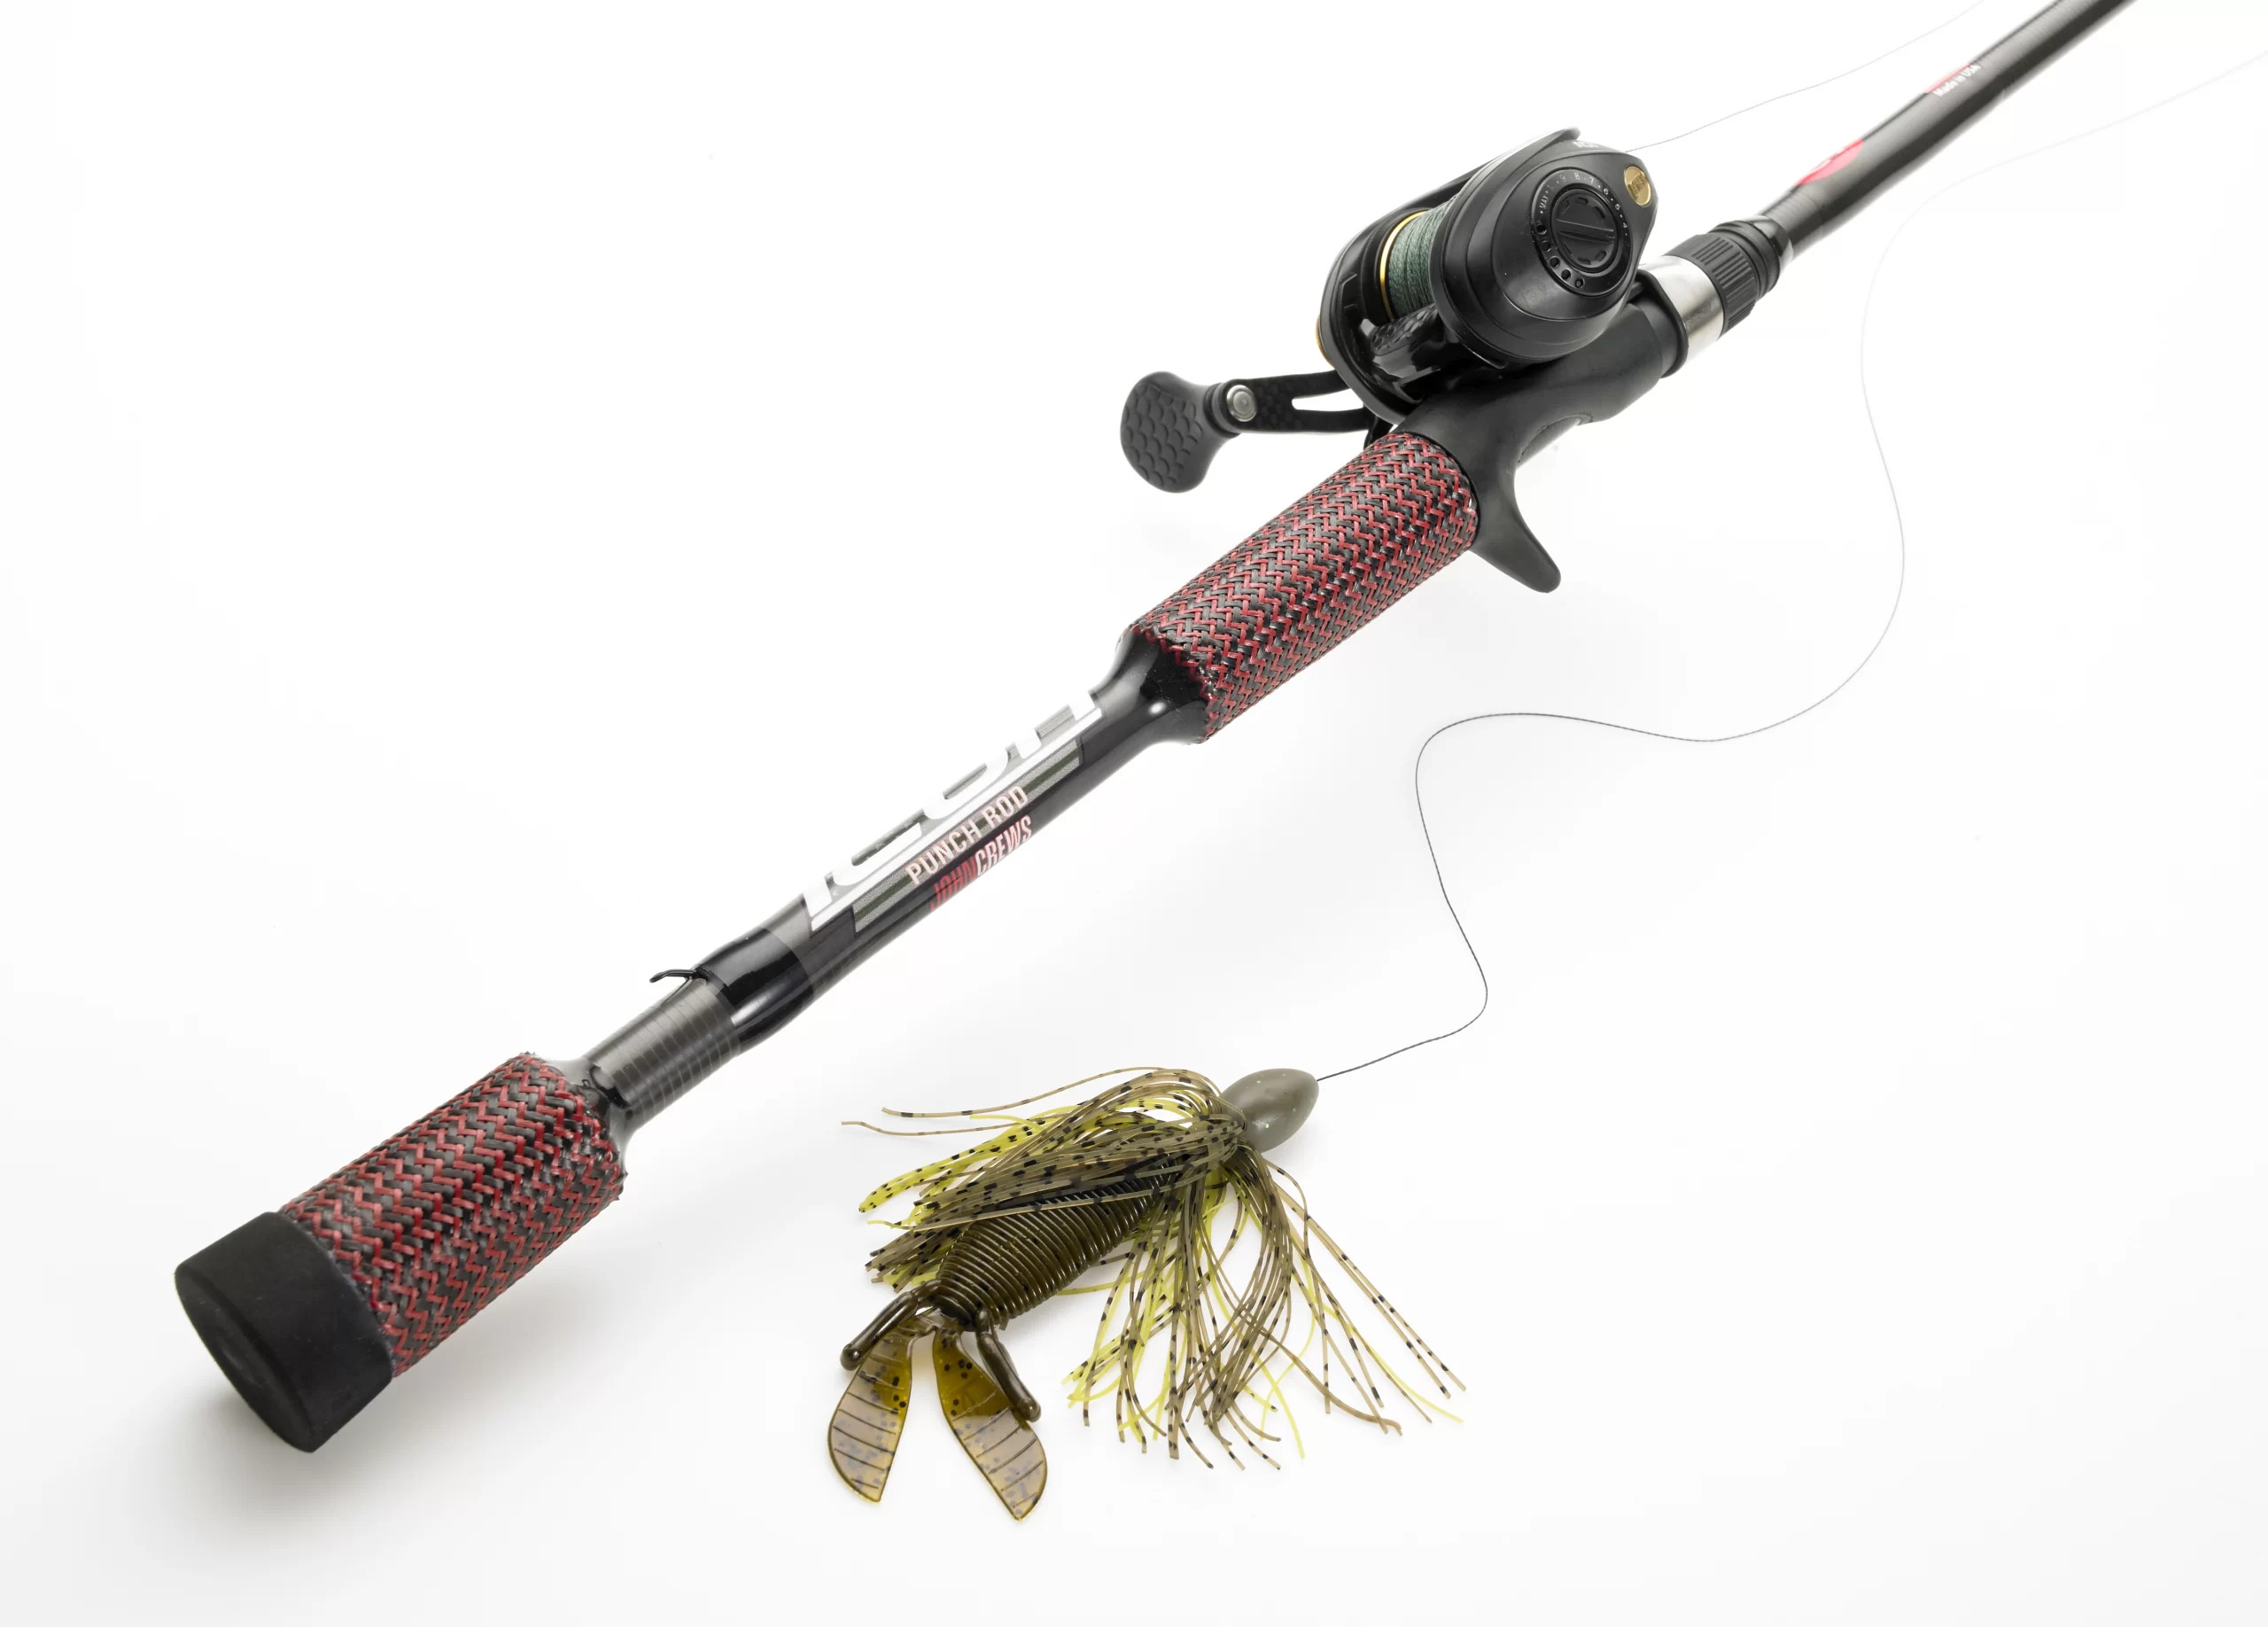 https://www.cashionrods.com/wp-content/uploads/2021/11/Cashion-JC-Punch-Rod-wide-angle-scaled-new.jpg